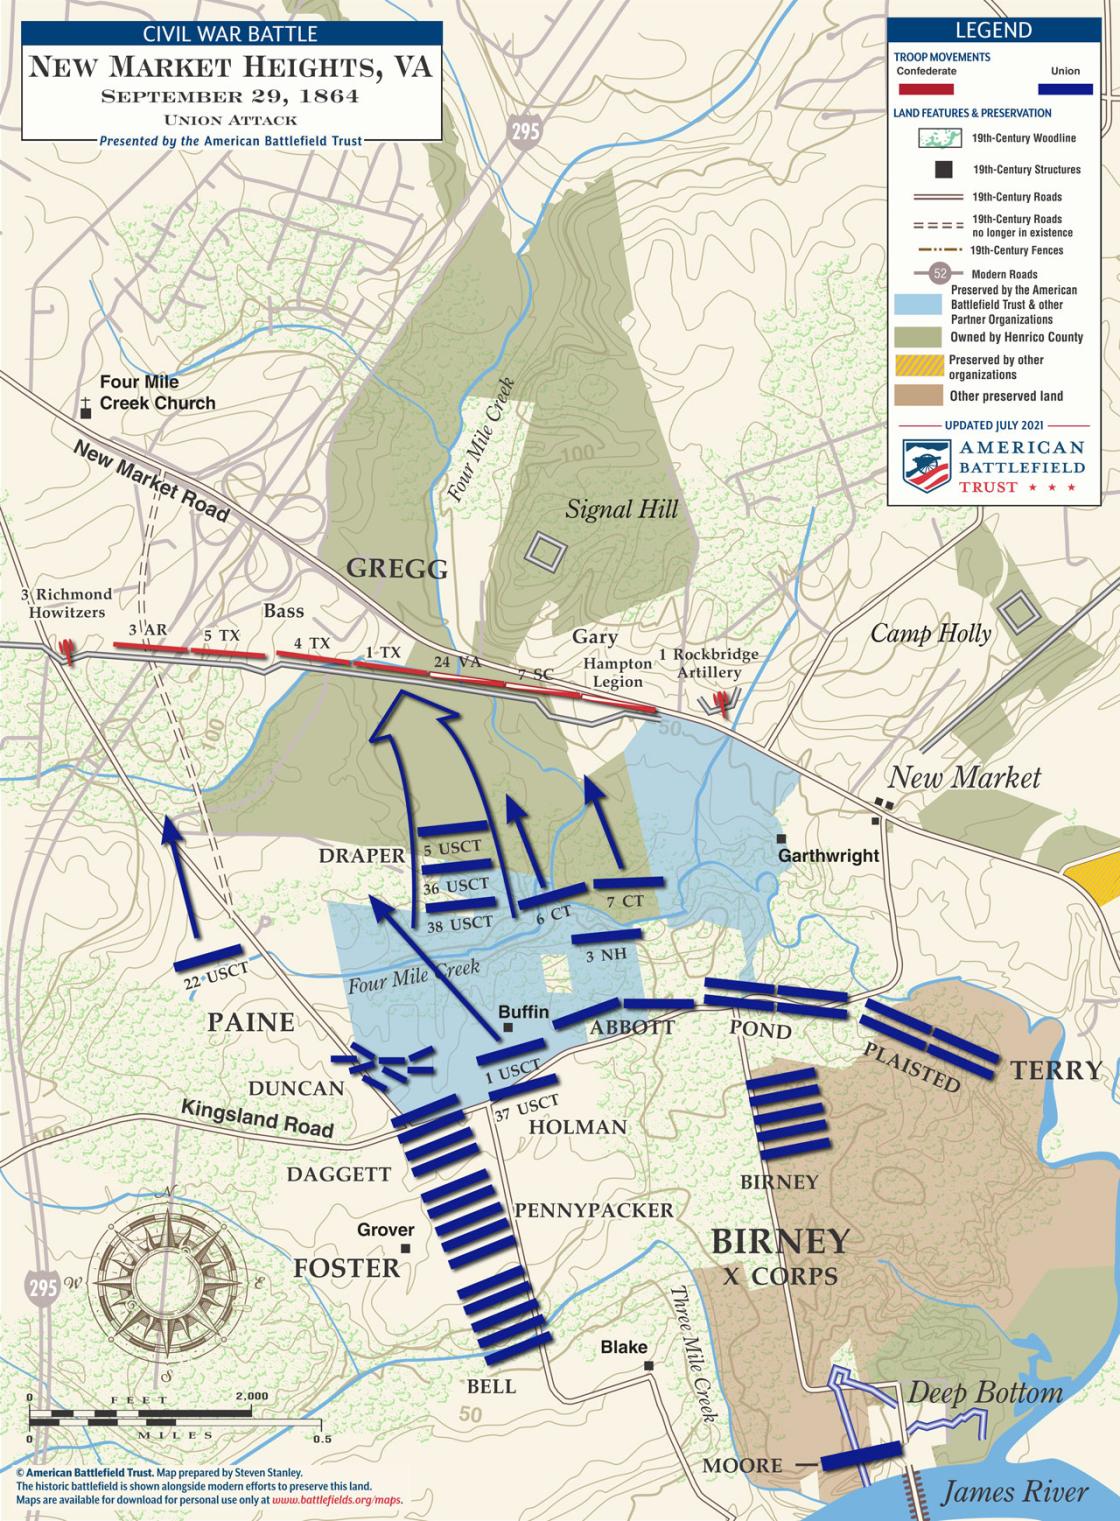 A battle map of the Union Attack at New Market Heights on September 29, 1864